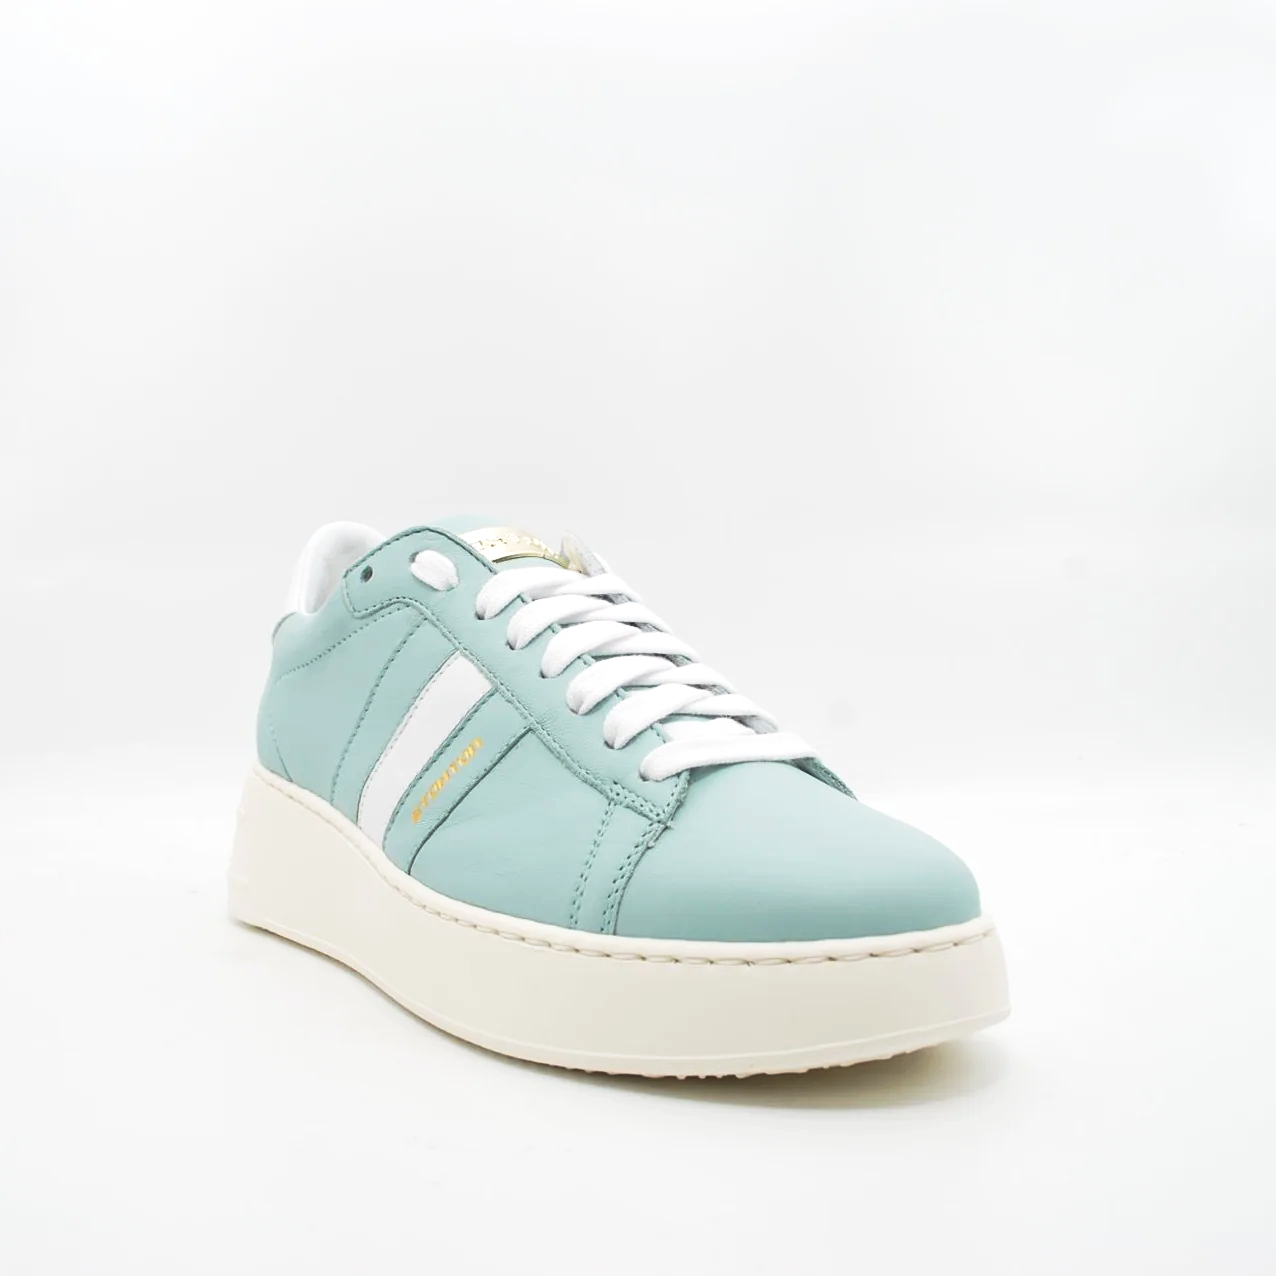 sneakers-stokton-in-pelle-sneakers-2_ecf0016e-fcaa-4a8c-88d9-1df674368617.png